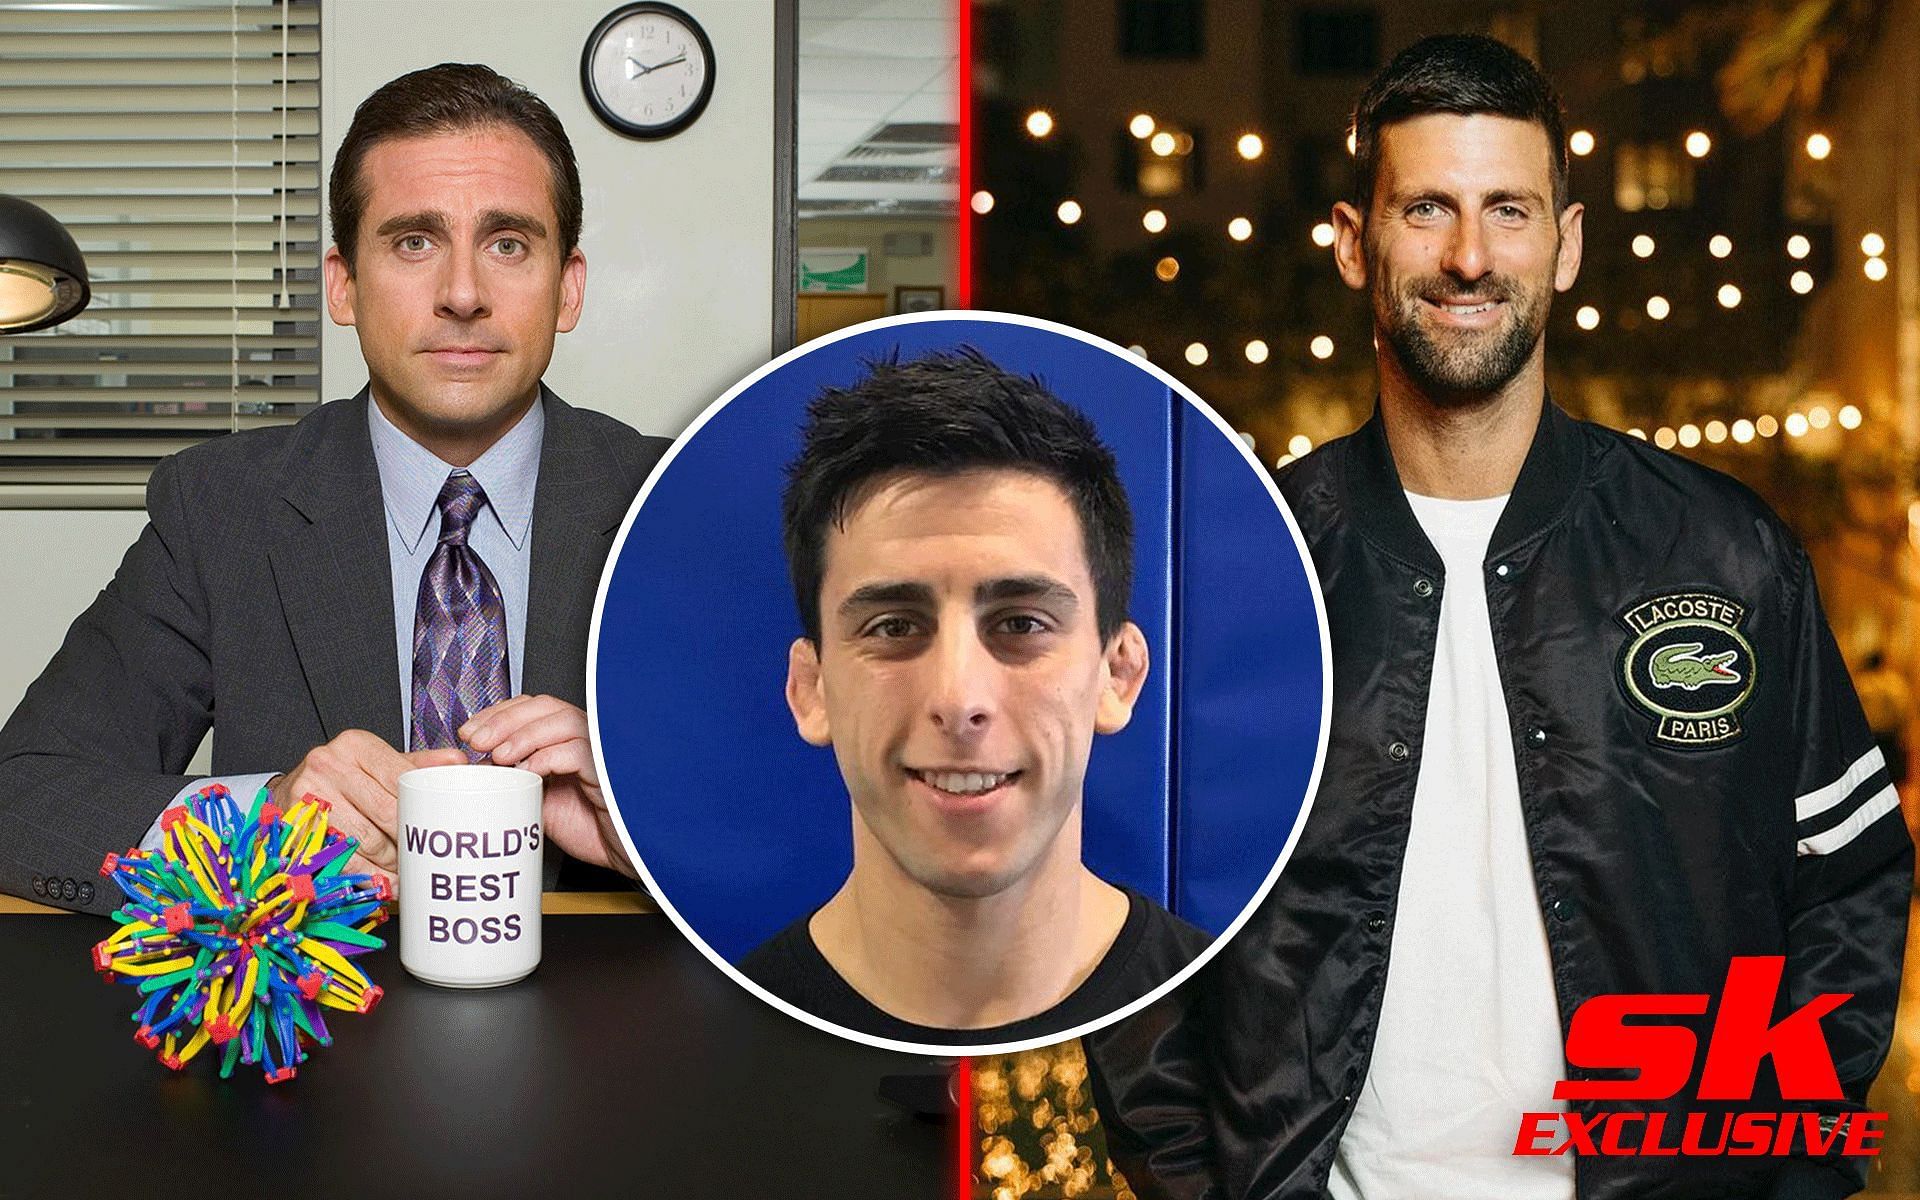 A number of fans have highlighted that Steve Erceg (inset) is a lookalike of Steve Carell (left) and Novak Djokovic (right) [Images courtesy: @theoffice, @ercegstephen, and @djokernole on Instagram]